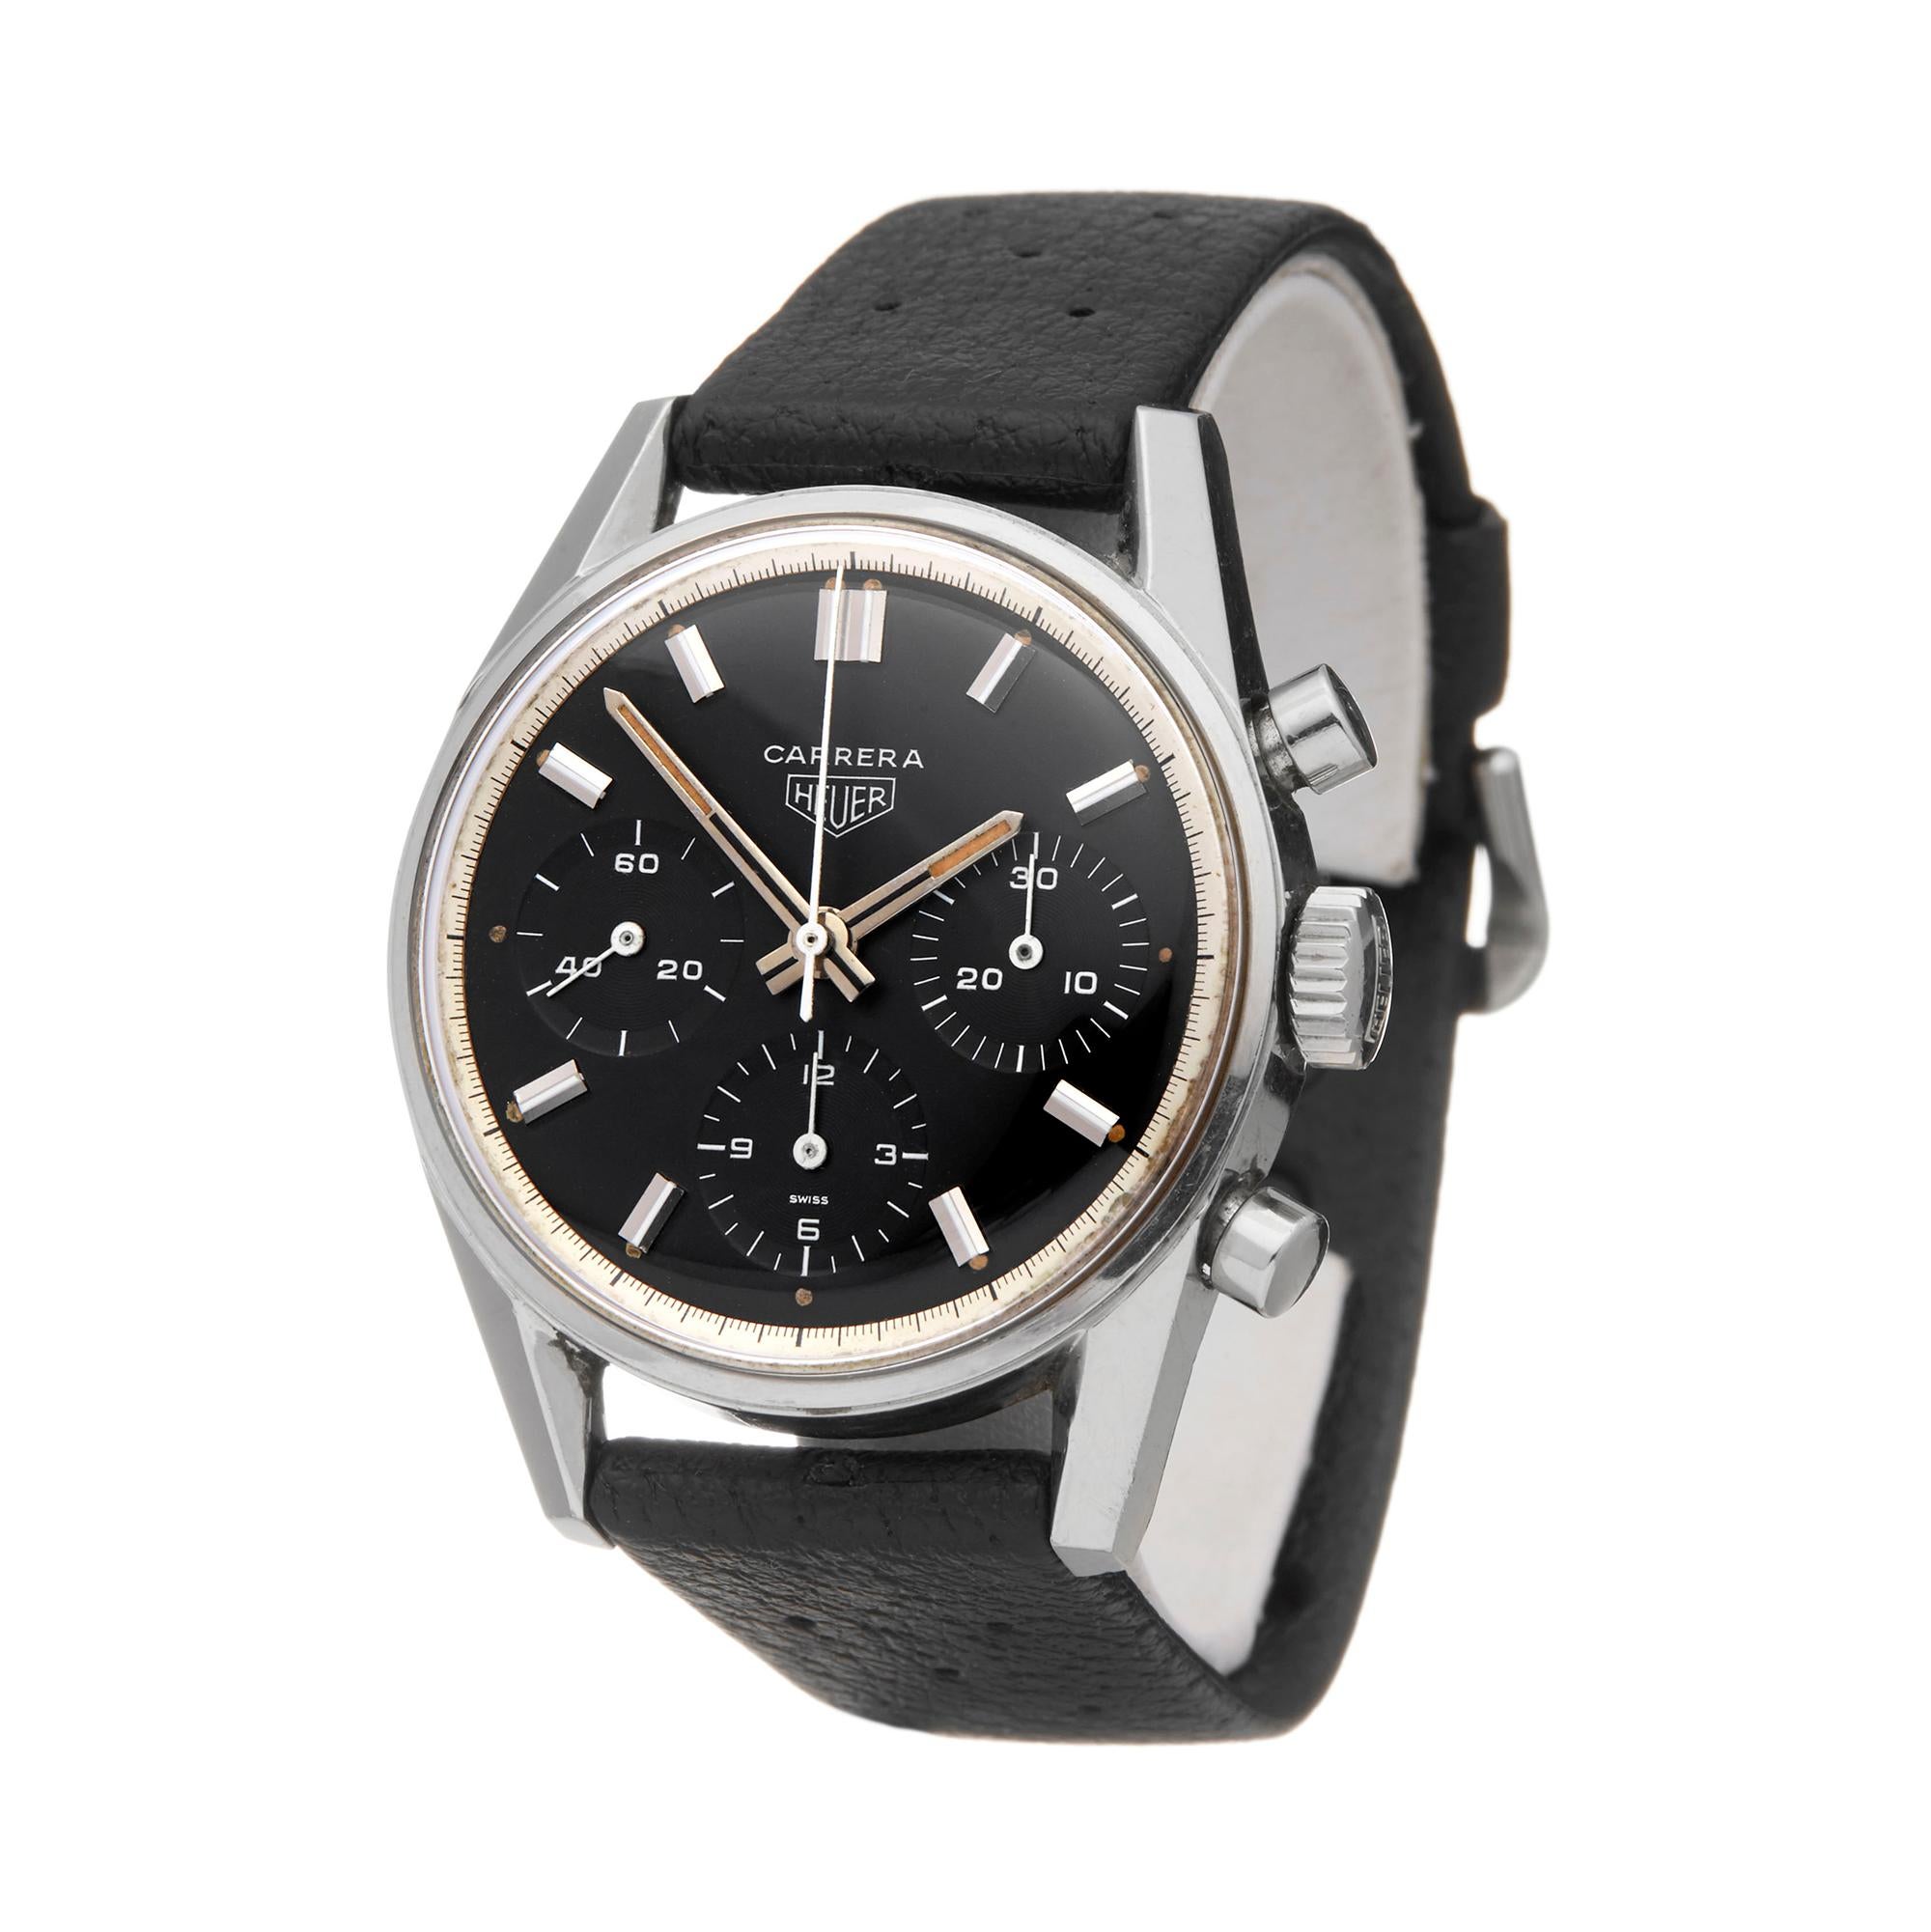 Ref: W5908
Manufacturer: Heuer
Model: Carrera
Model Ref: 2447
Age: Circa 1960's
Gender: Mens
Complete With: Presentation Box
Dial: Black Baton
Glass: Plexiglass
Movement: Mechanical Wind
Water Resistance: To Manufacturers Specifications
Case: